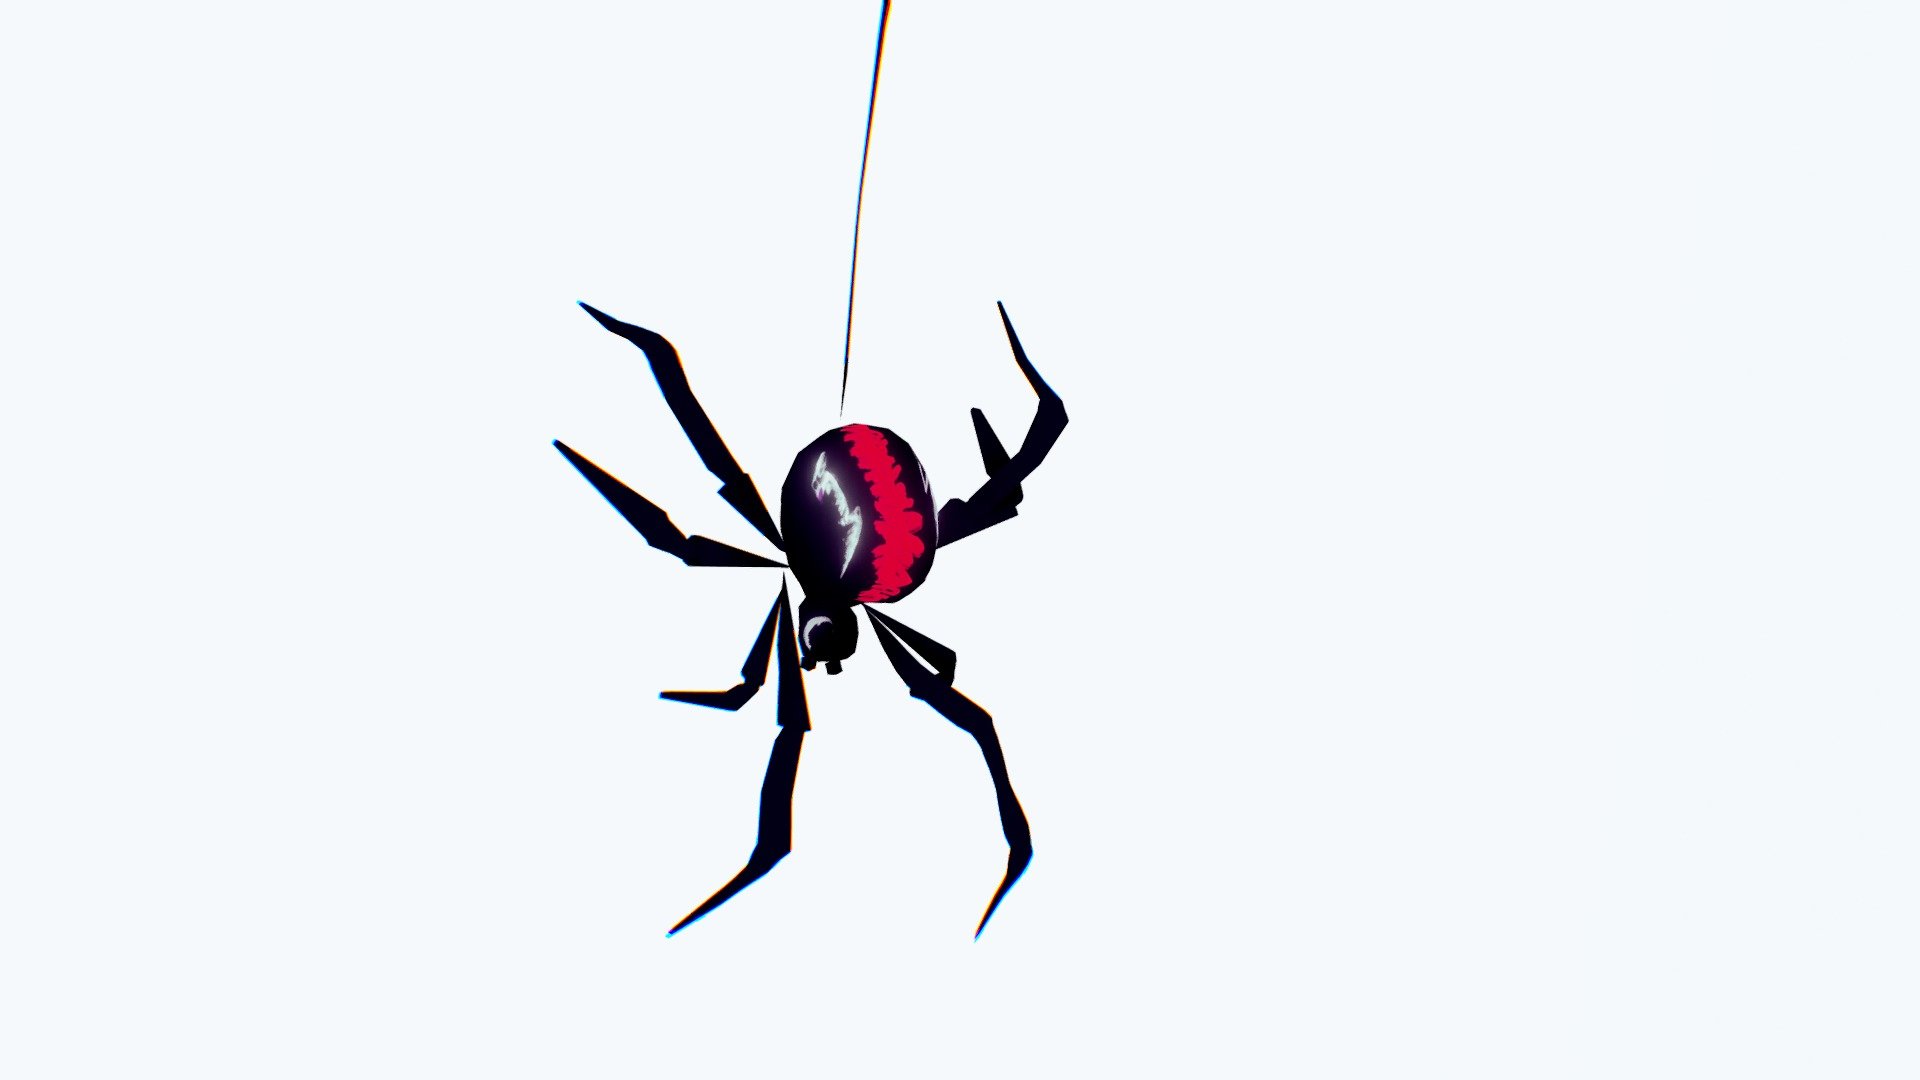 Super basic spider I desgned to test using Soft Body physics for secondary motion animation. Using oft body to get the swing on legs speeds up my process by cutting out rigs for less important creatures while keeping this bit of movement 3d model